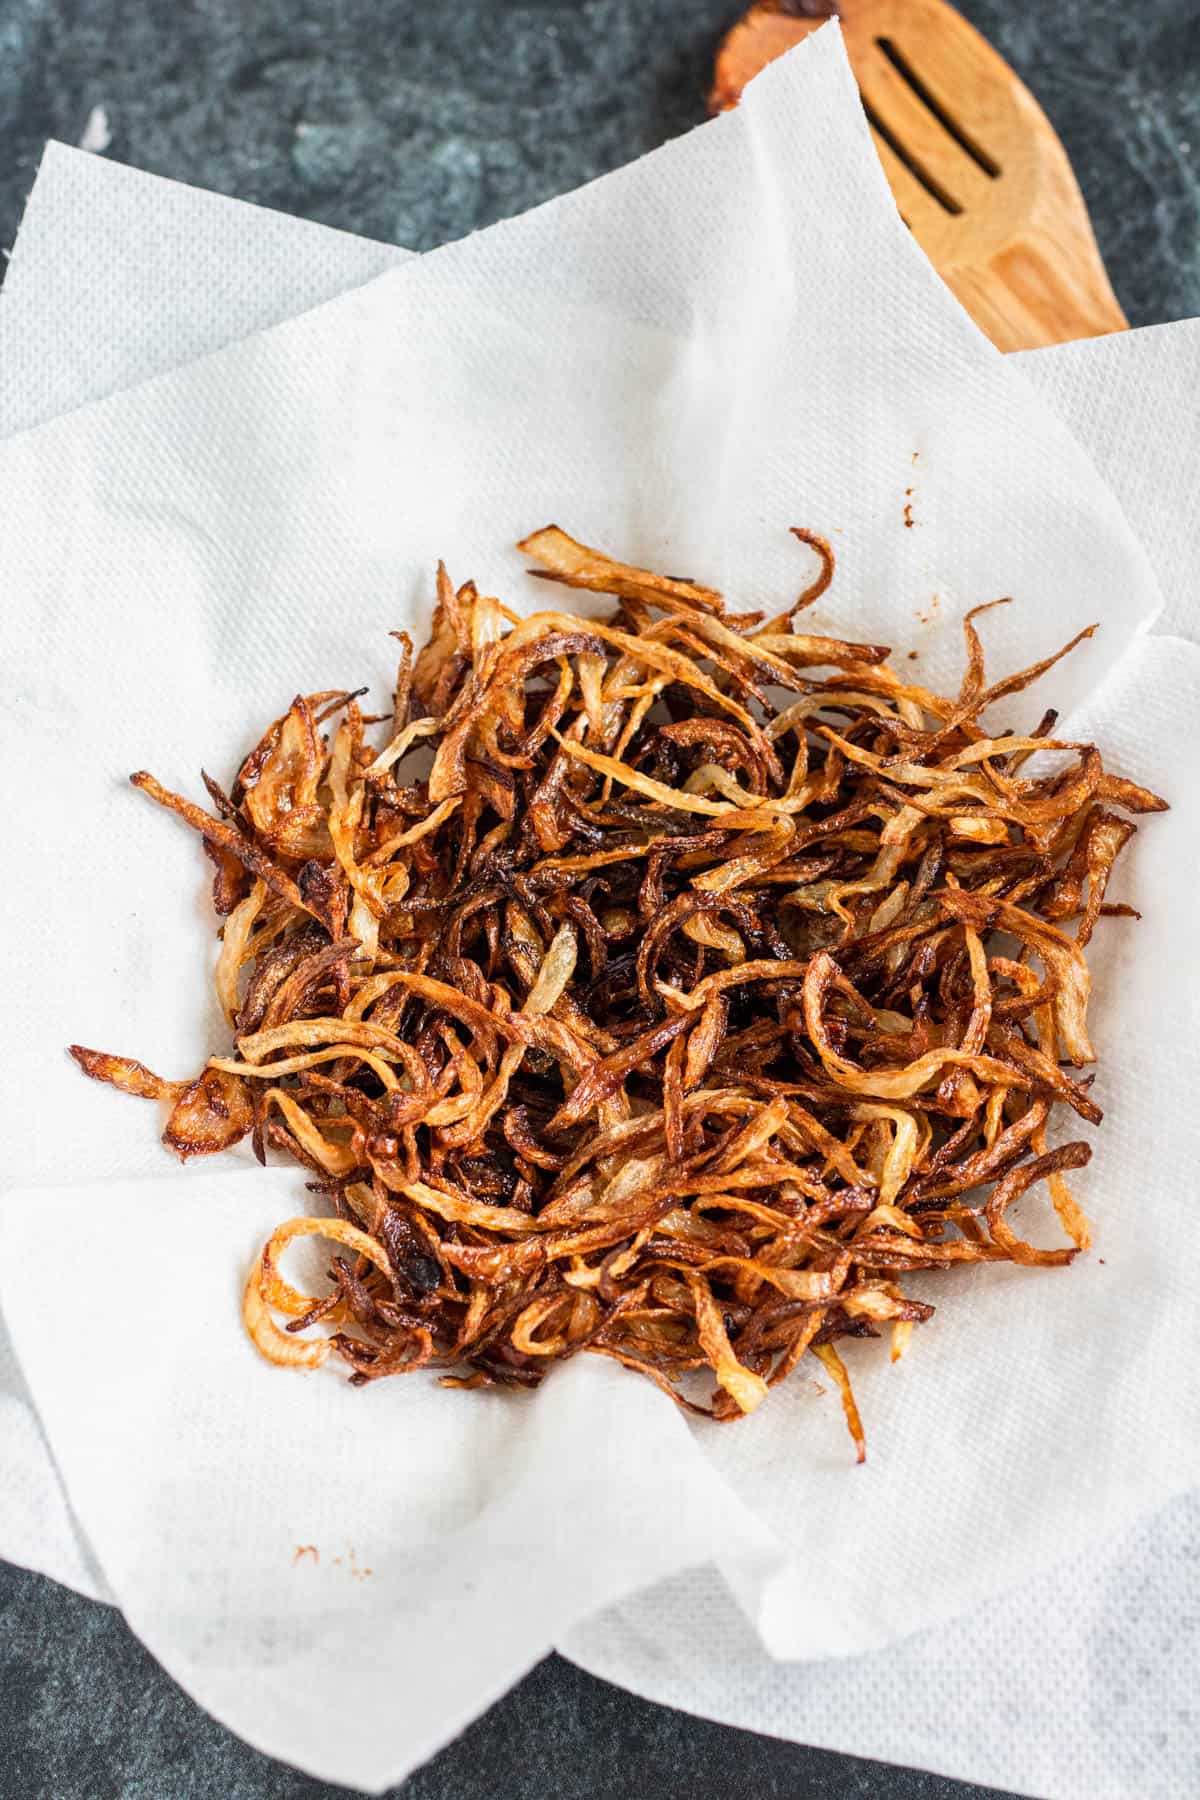 fried onions on a paper towel-lined plate